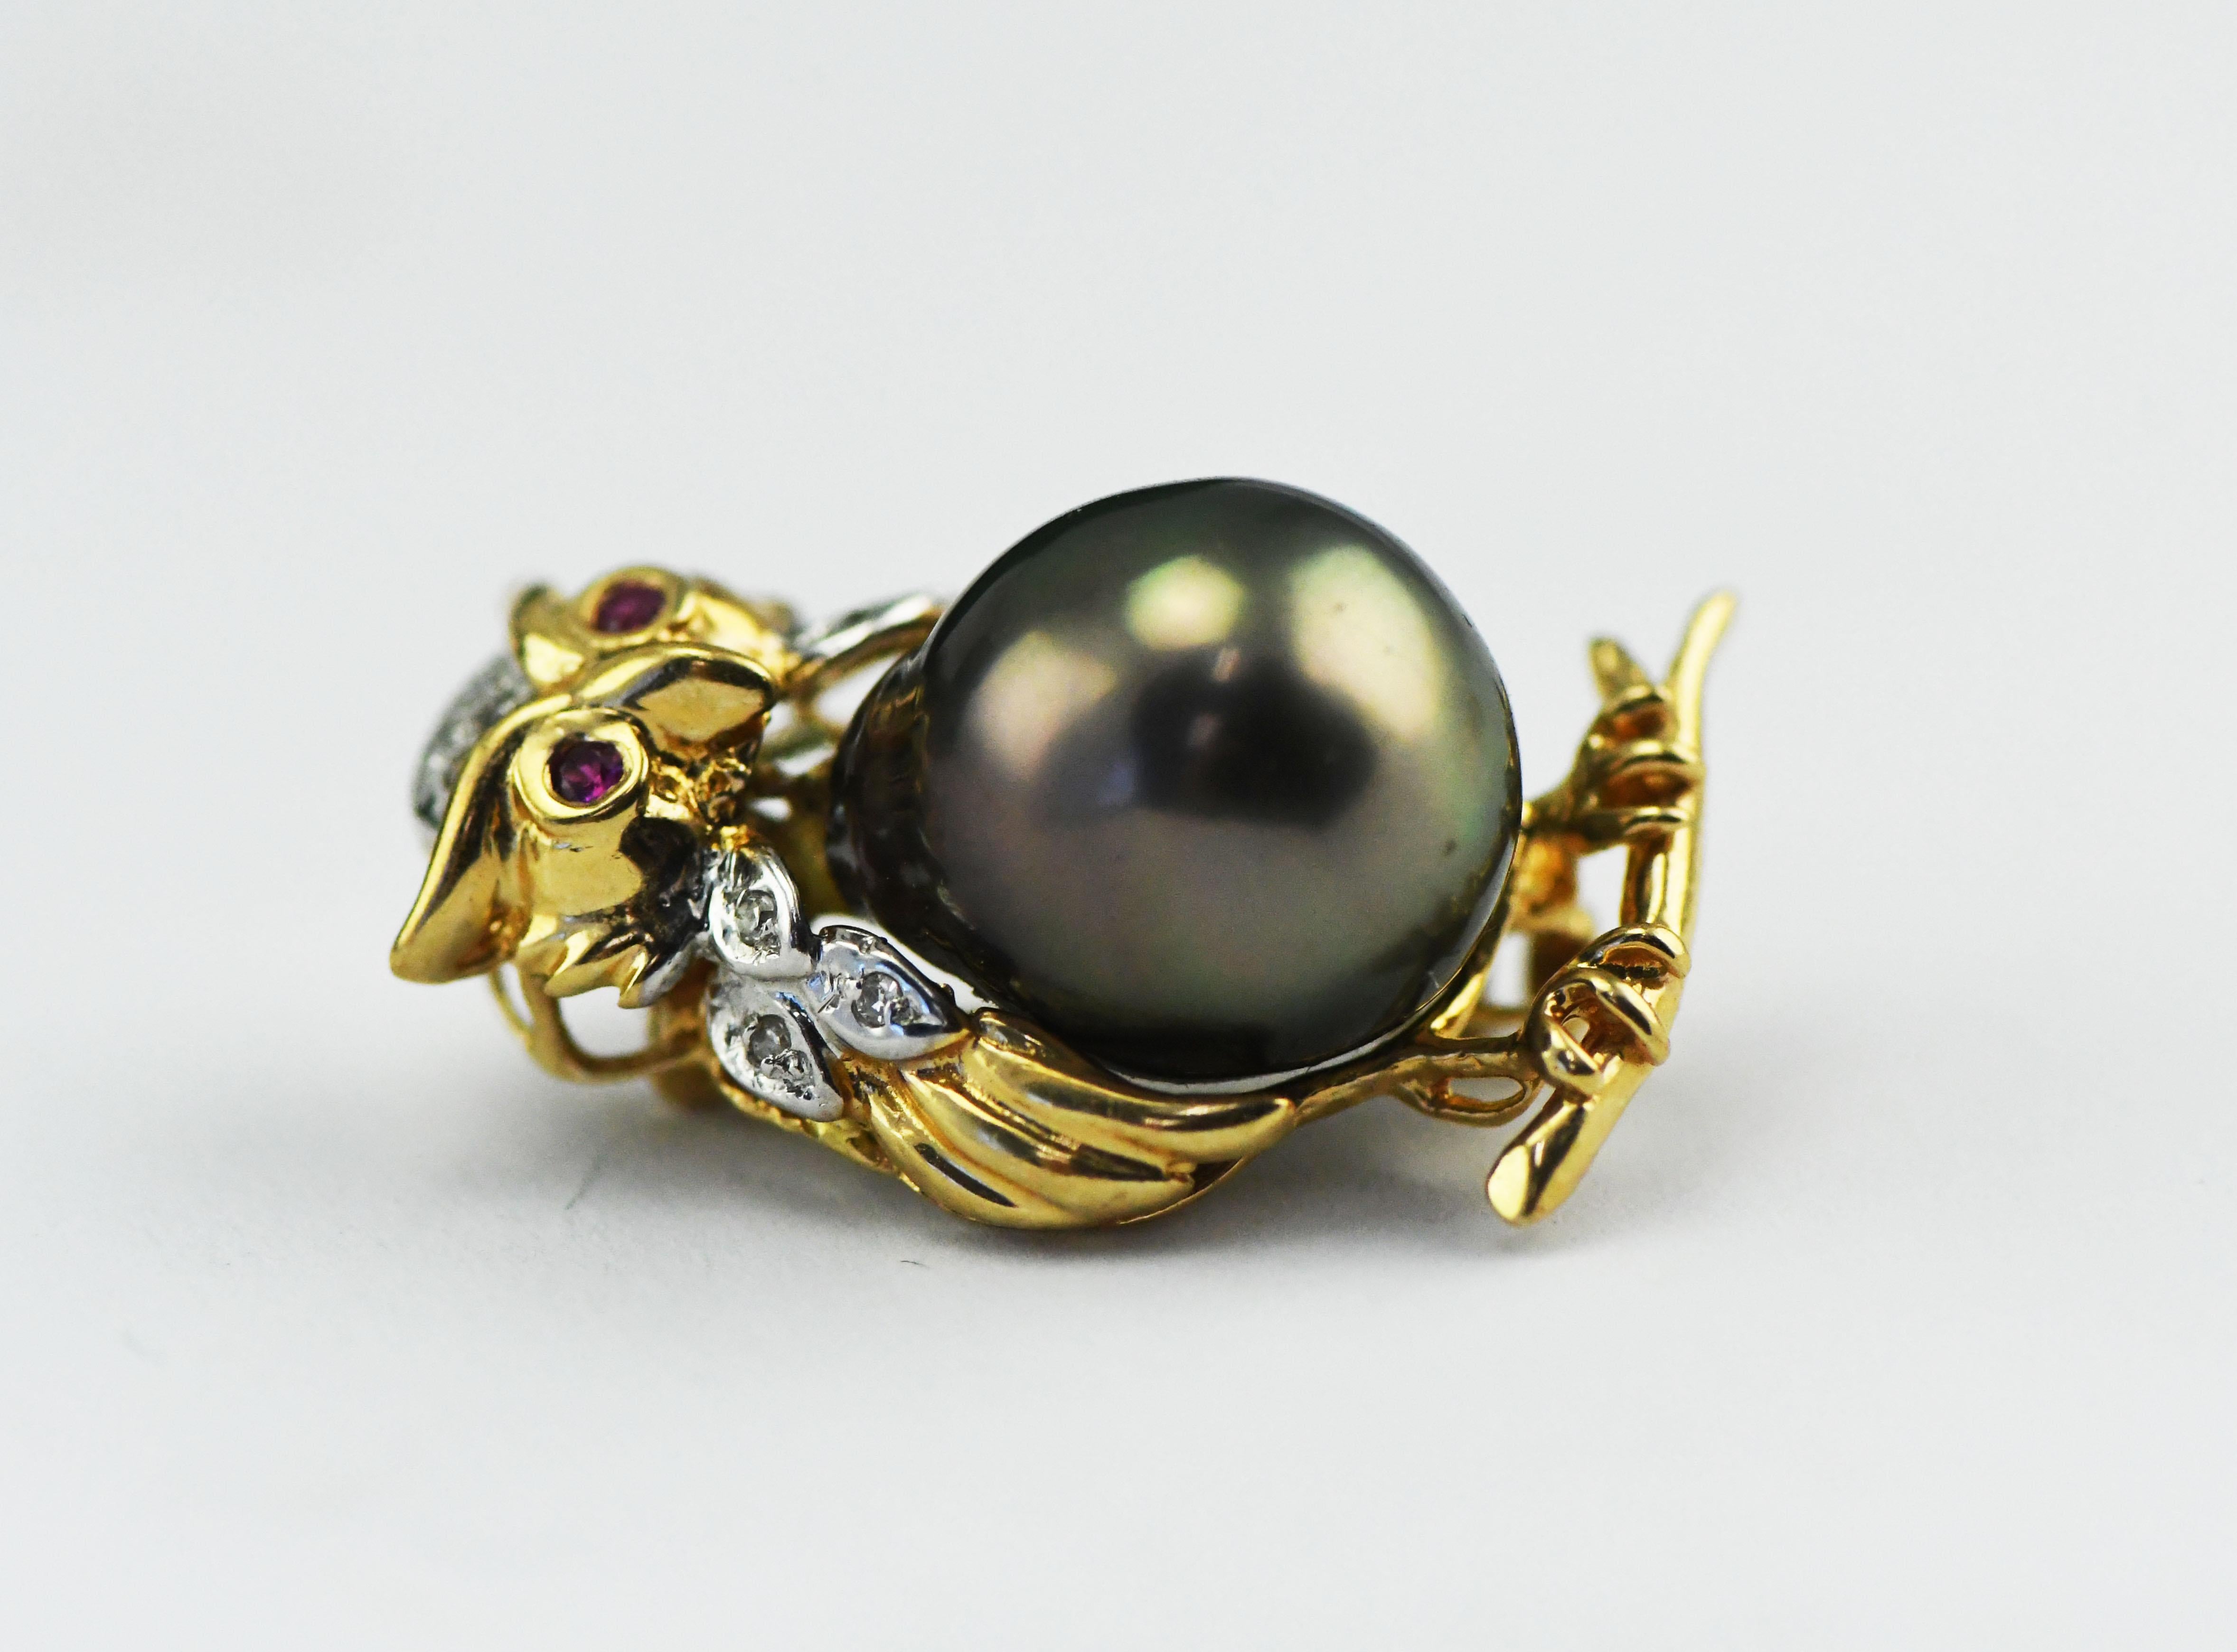 14k Gold Ruby Eyed Horned Owl Pin Pendant with Tahitian South Sea Pearl & Diamond Accents.  
5.9 grams and is about 1